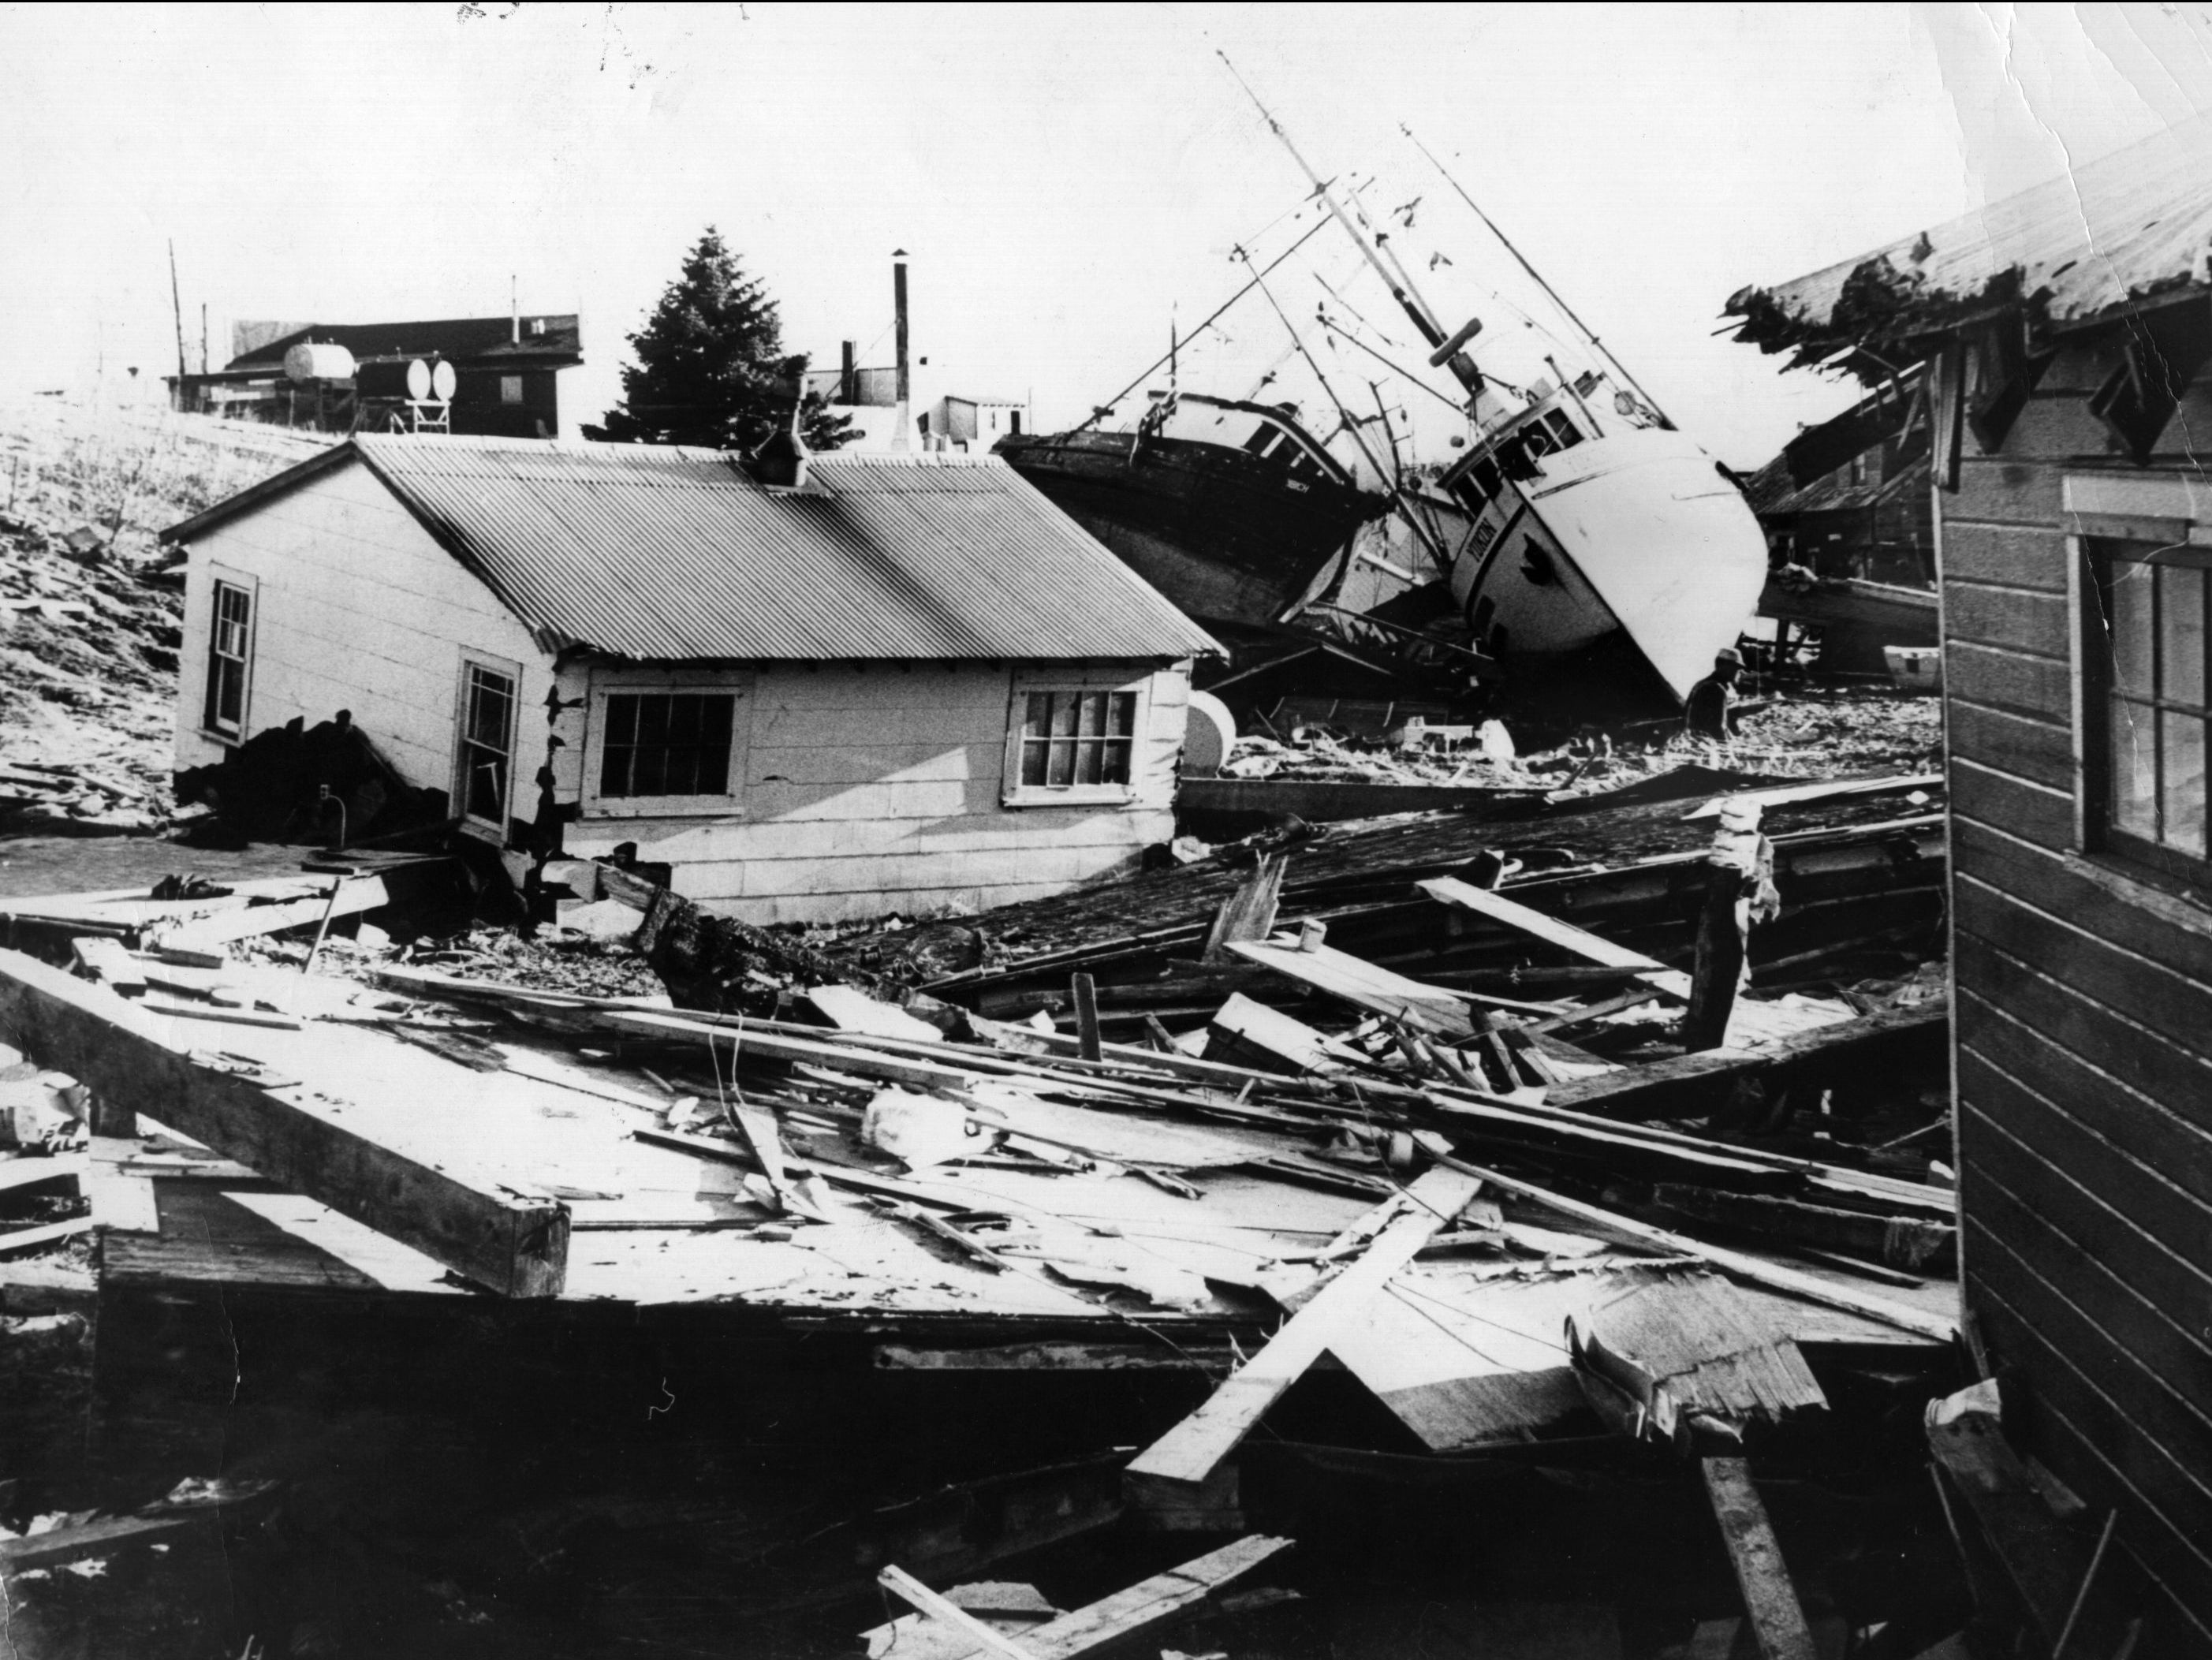 A small fishing village on Kodiak Island in Alaska littered with debris from houses and boats after an earthquake and tidal wave struck it on 4 April 1964